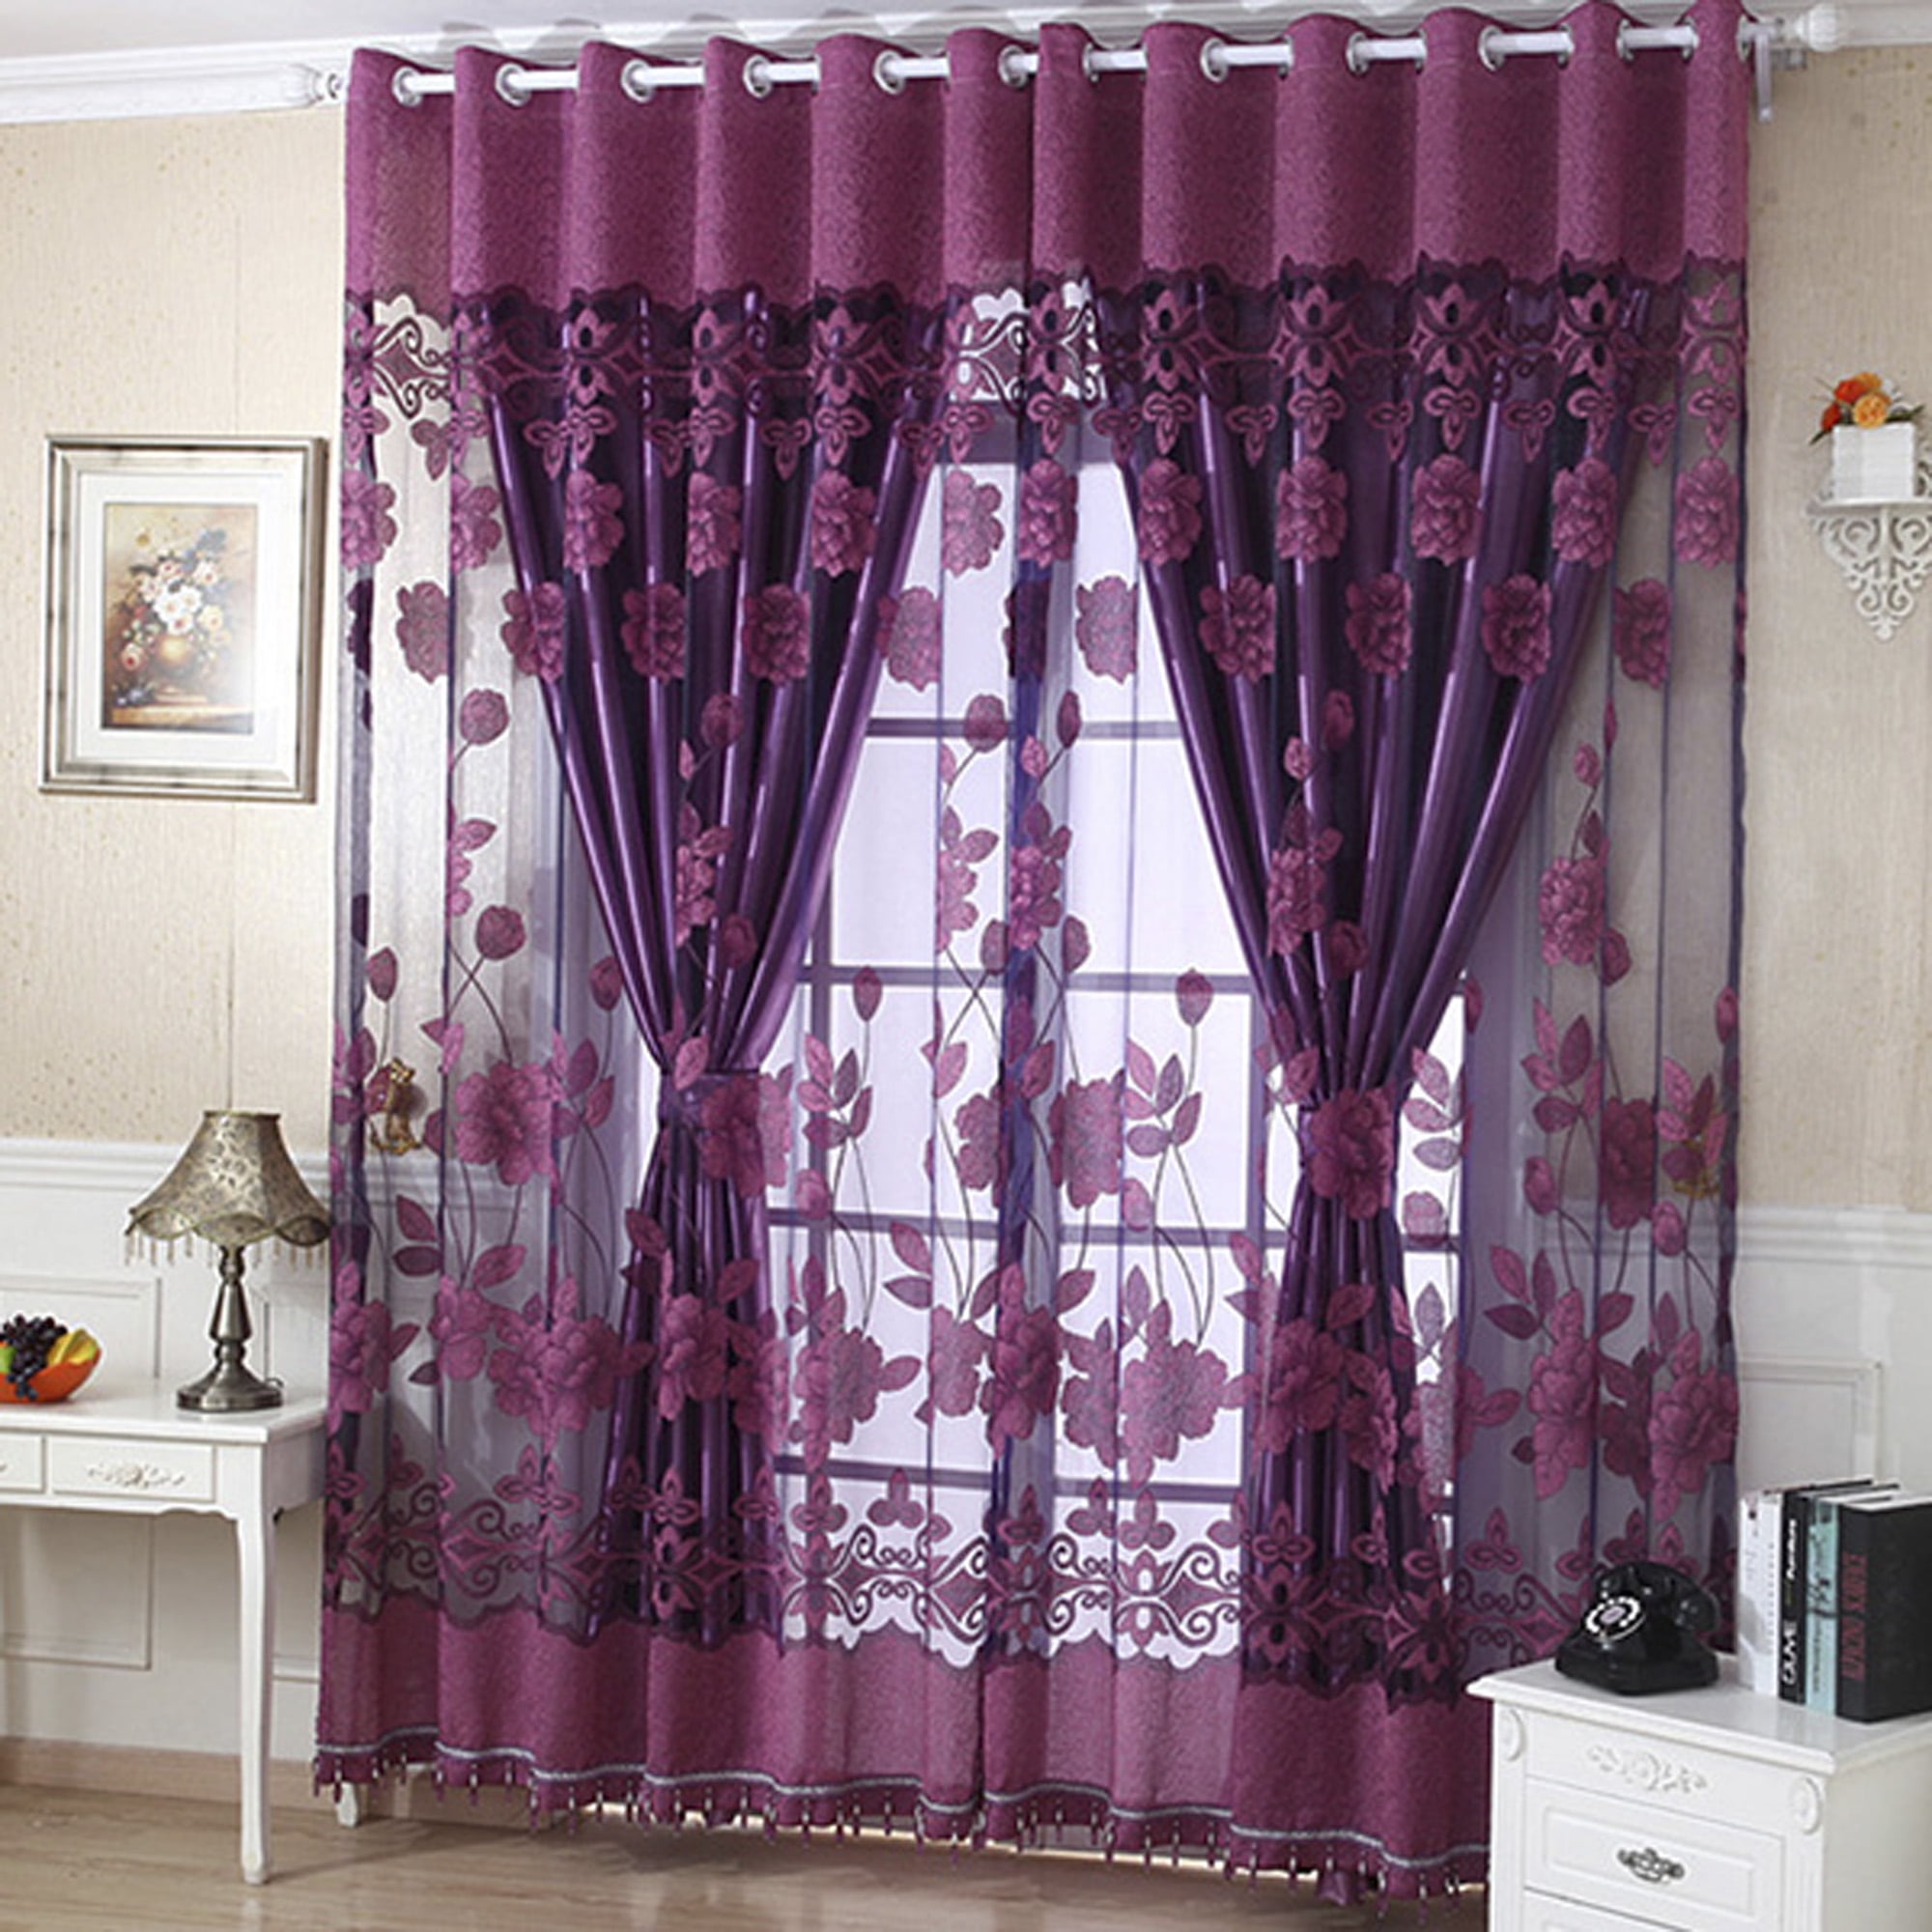 2x1m Window Curtain Floral Tulle Voile Door Drape Panel Sheer Scarf Valance HOT 